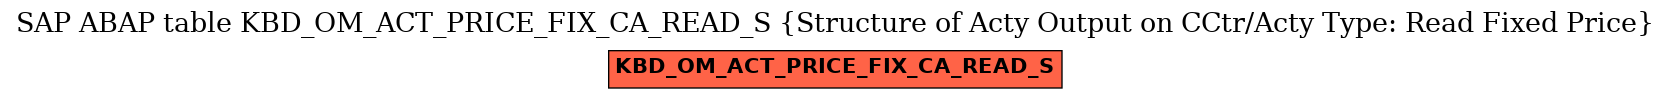 E-R Diagram for table KBD_OM_ACT_PRICE_FIX_CA_READ_S (Structure of Acty Output on CCtr/Acty Type: Read Fixed Price)